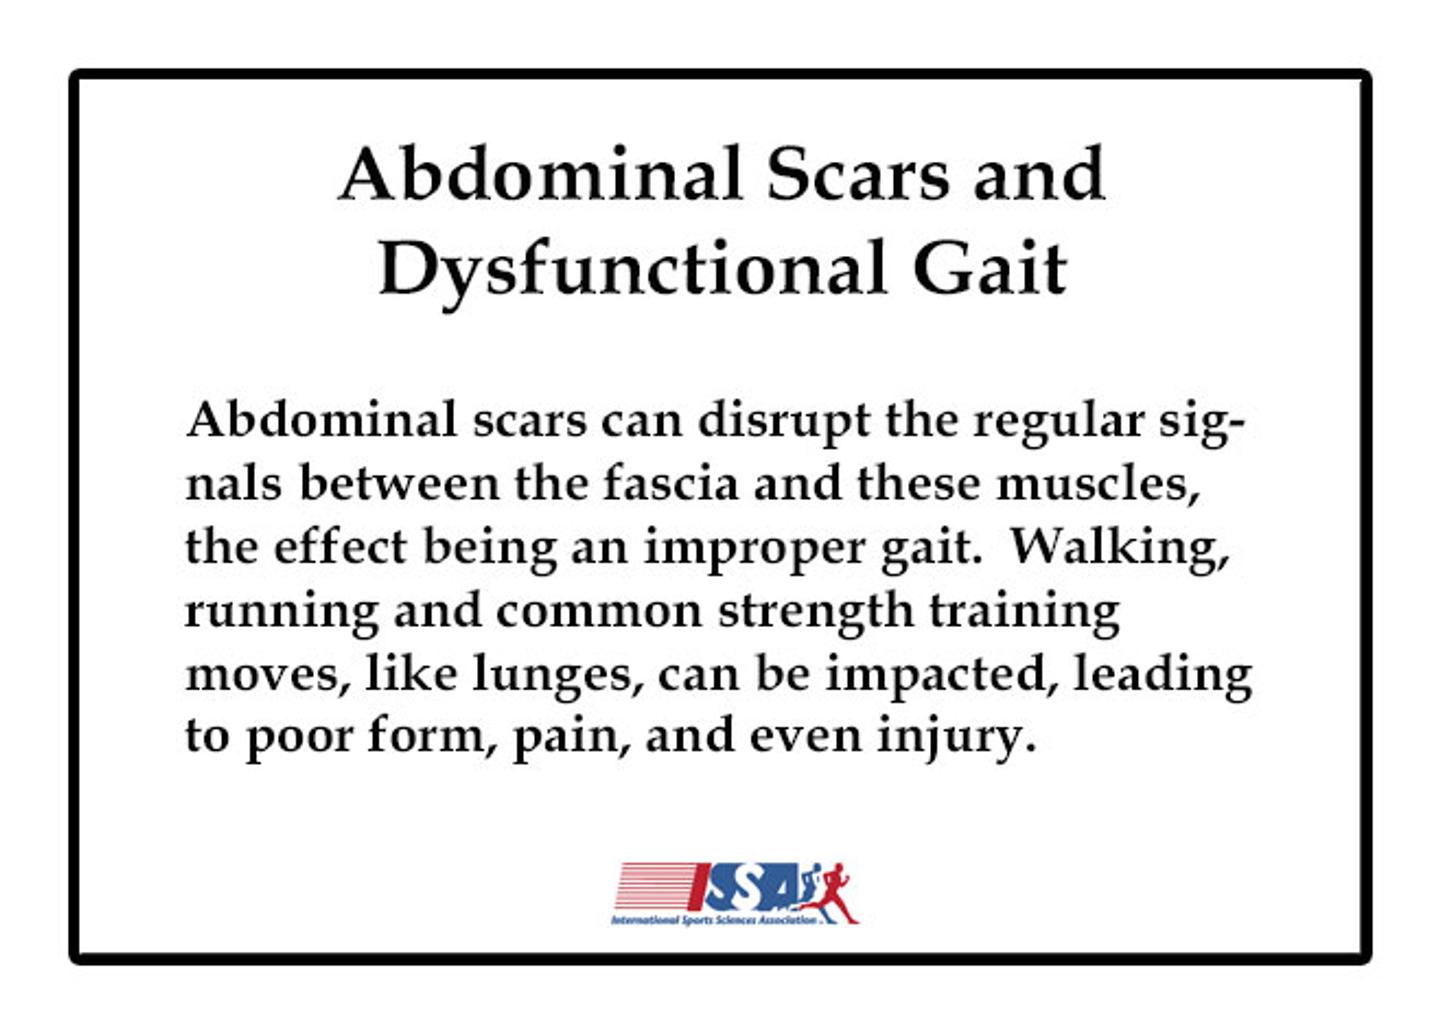 Abdominal scars can disrupt the regular signals between the fascia and these muscles, the effect being an improper gait.